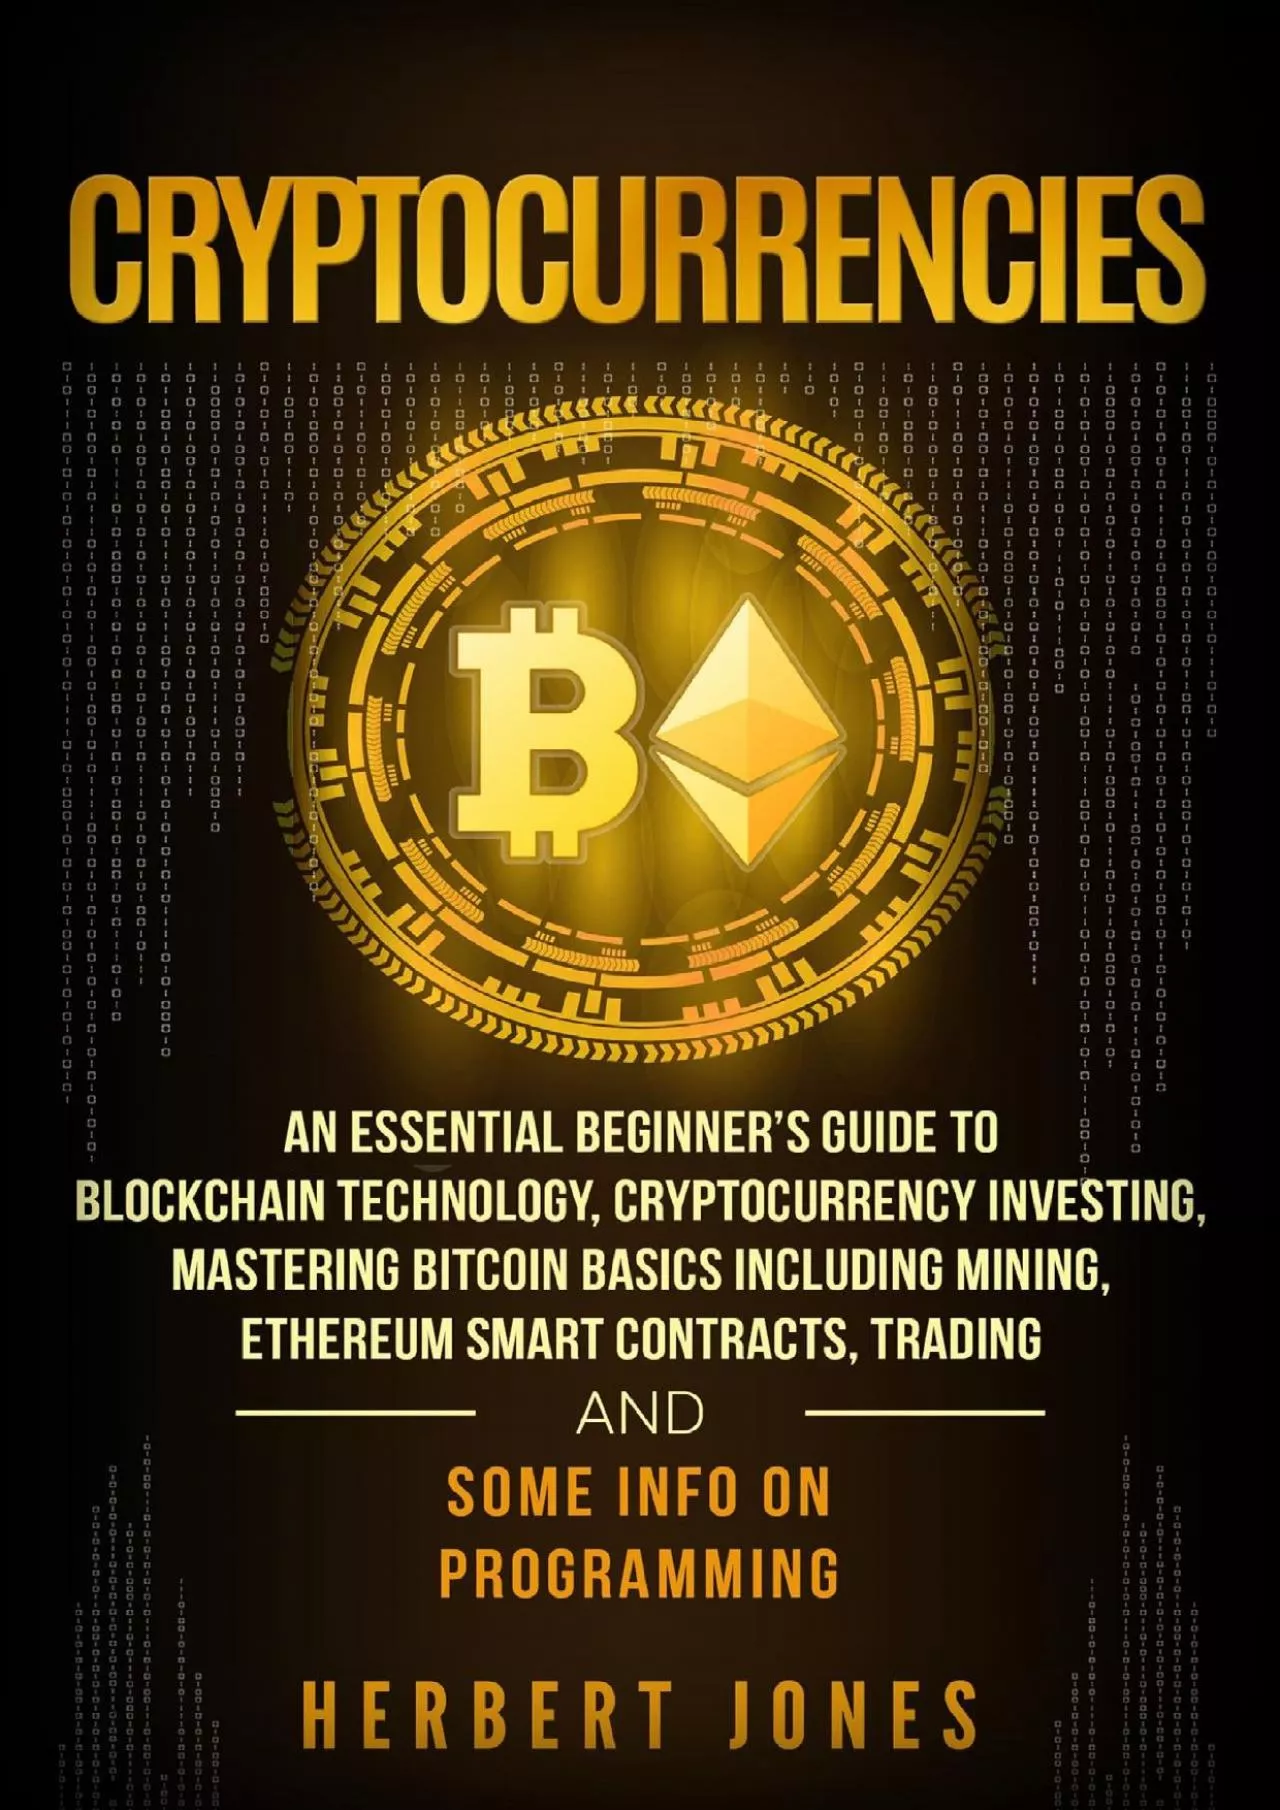 (BOOK)-Cryptocurrencies: An Essential Beginner\'s Guide to Blockchain Technology, Cryptocurrency